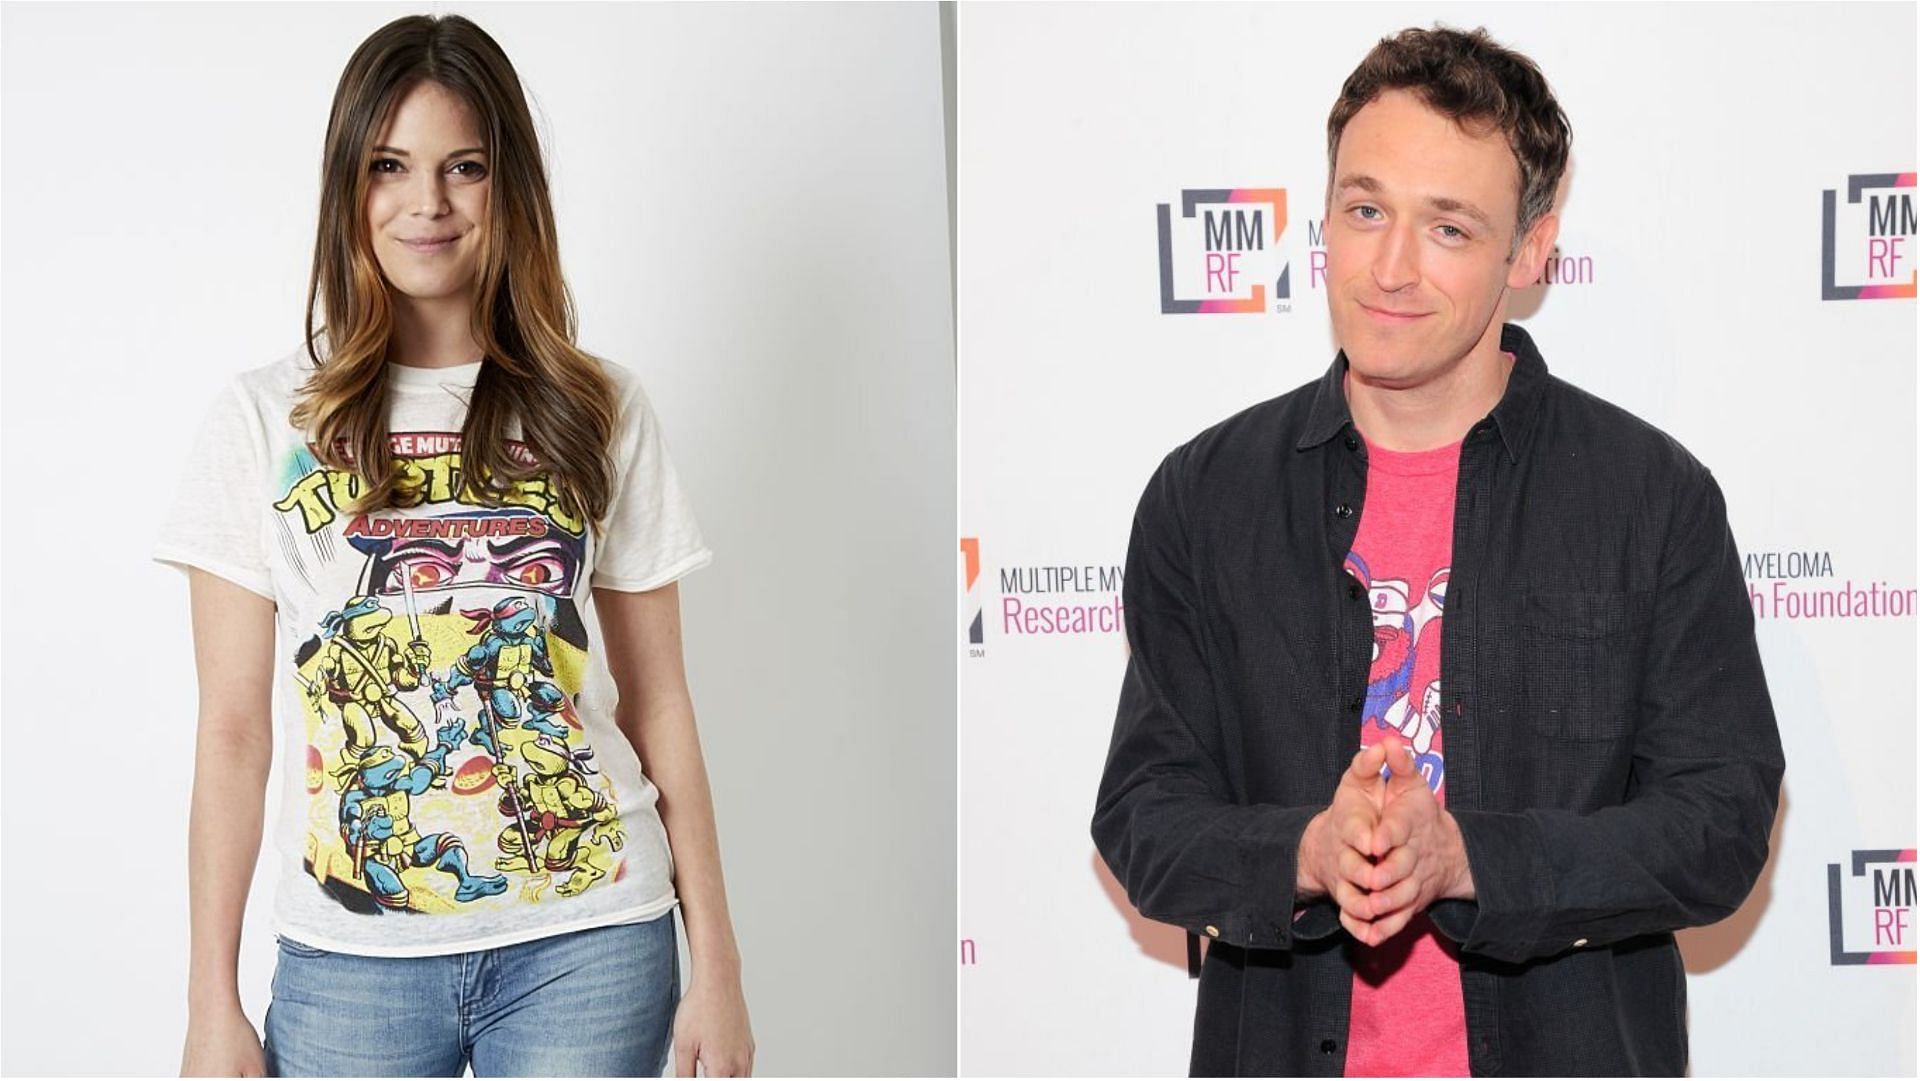 Katie Nolan and Dan Soder have been romantically linked since 2020 (Images via Taylor Ballantyne and Owen Hoffmann/Getty Images)